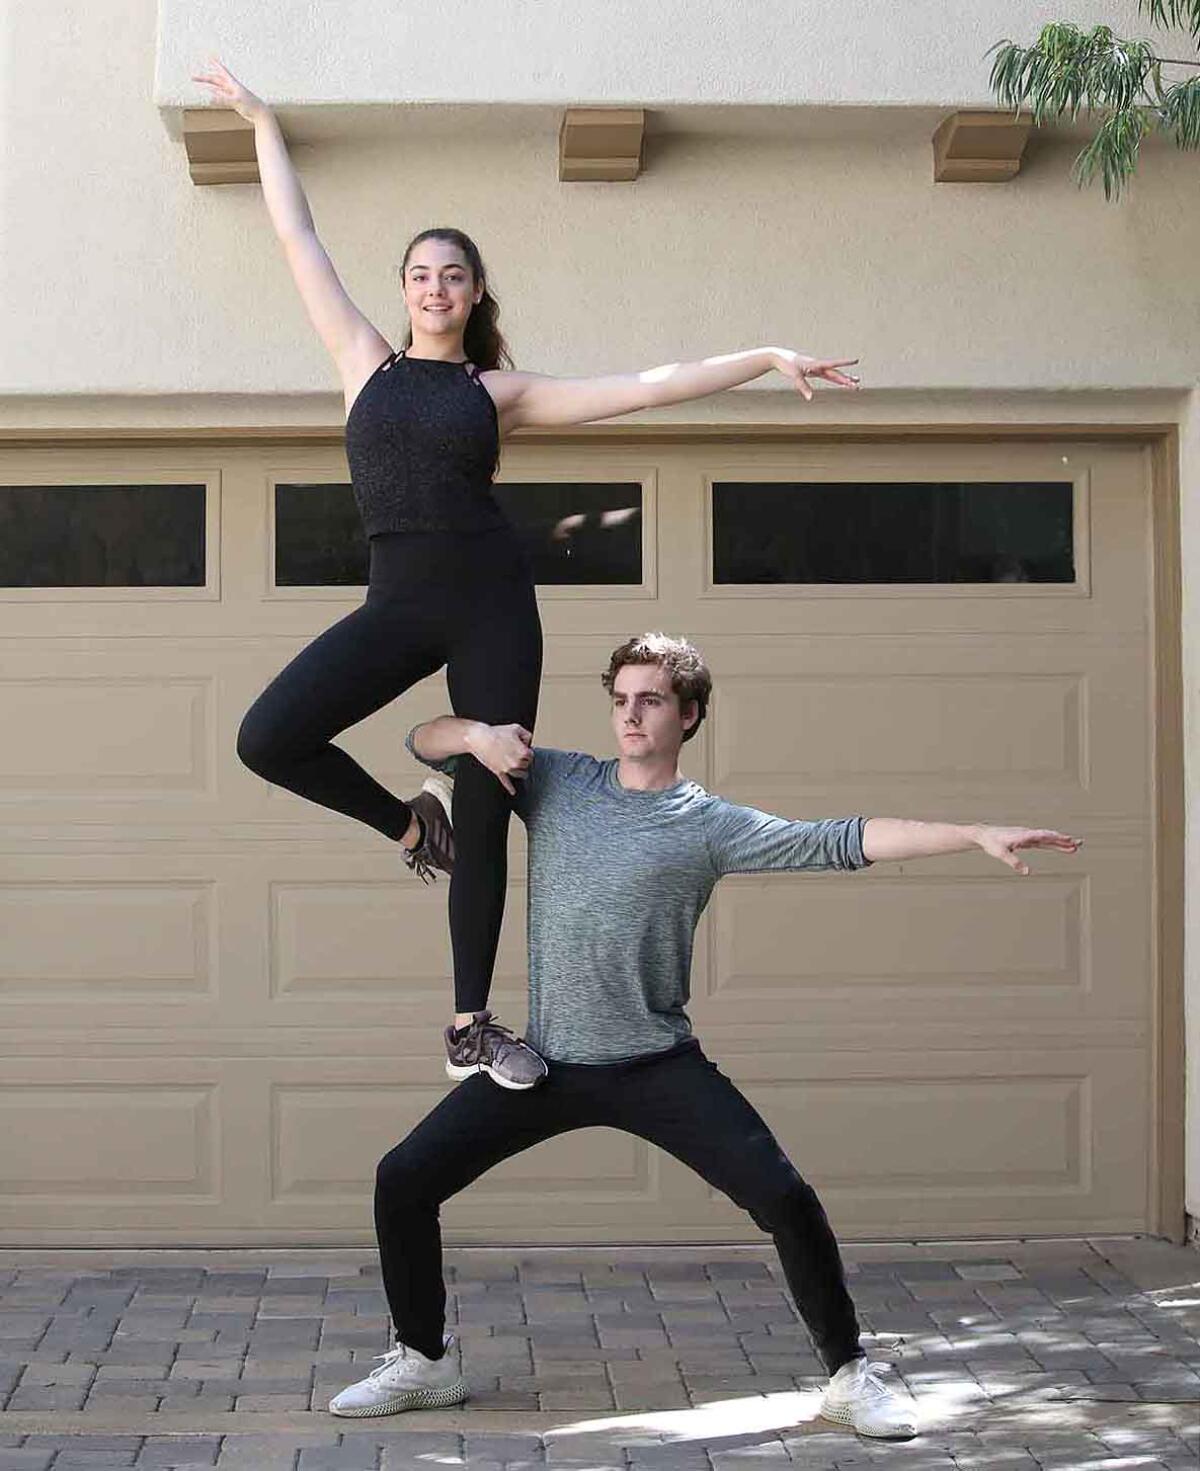 Juliette, left, and Lucas Shadid are a local ice dance team from Newport Coast, who have been competing together for nearly a decade.